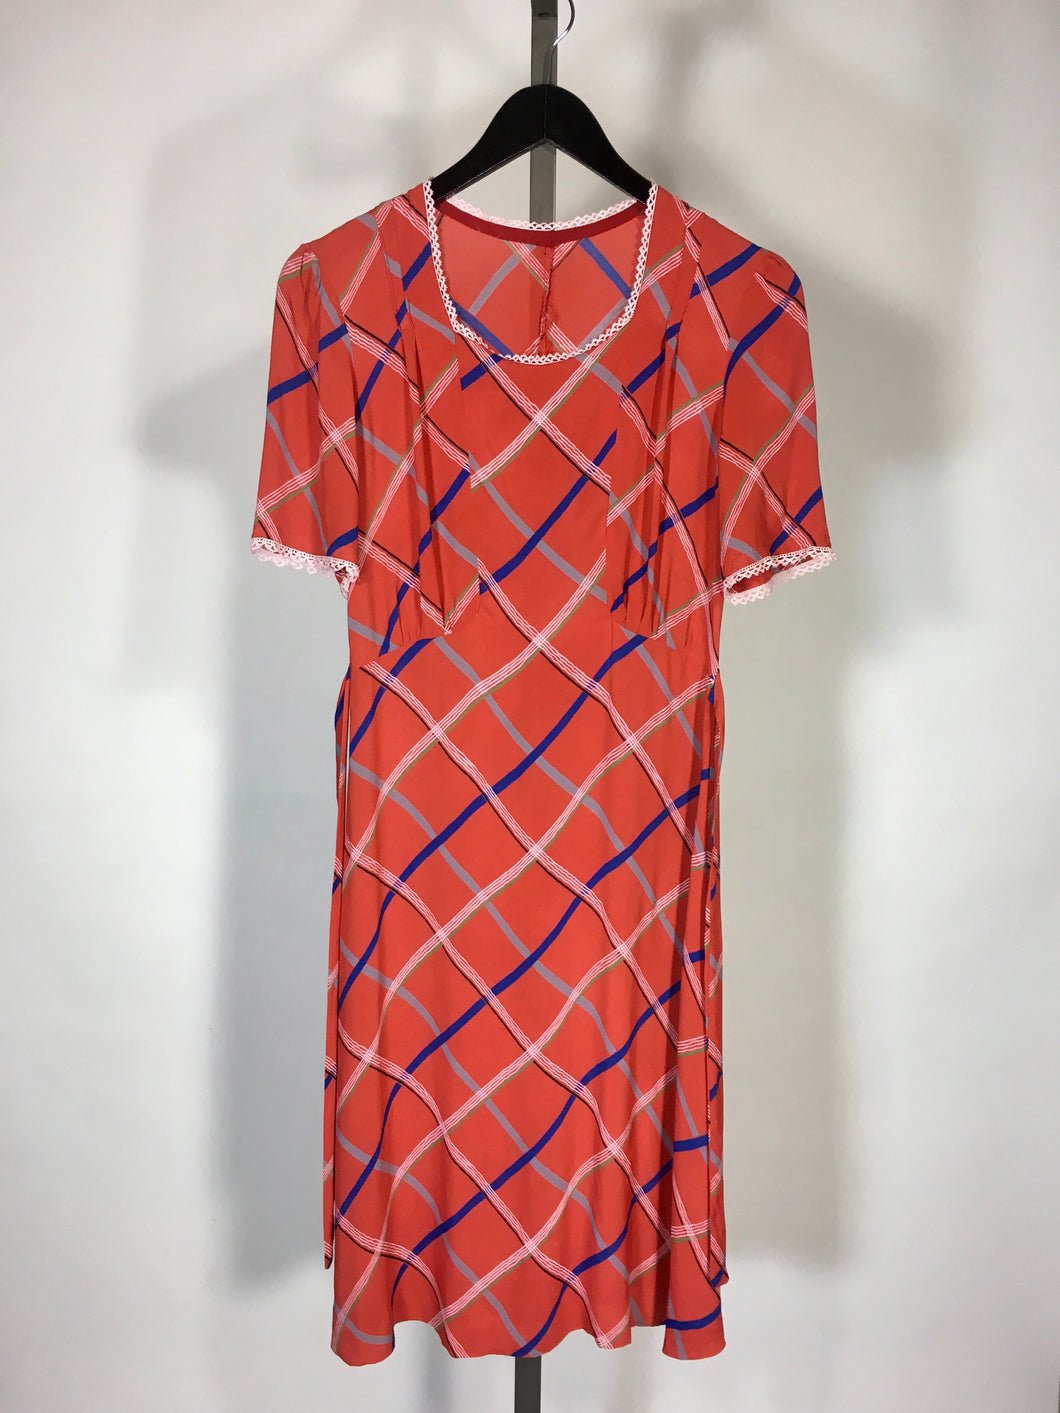 1930’s red-orange check print cold rayon dress with waist sash and lace cuff details